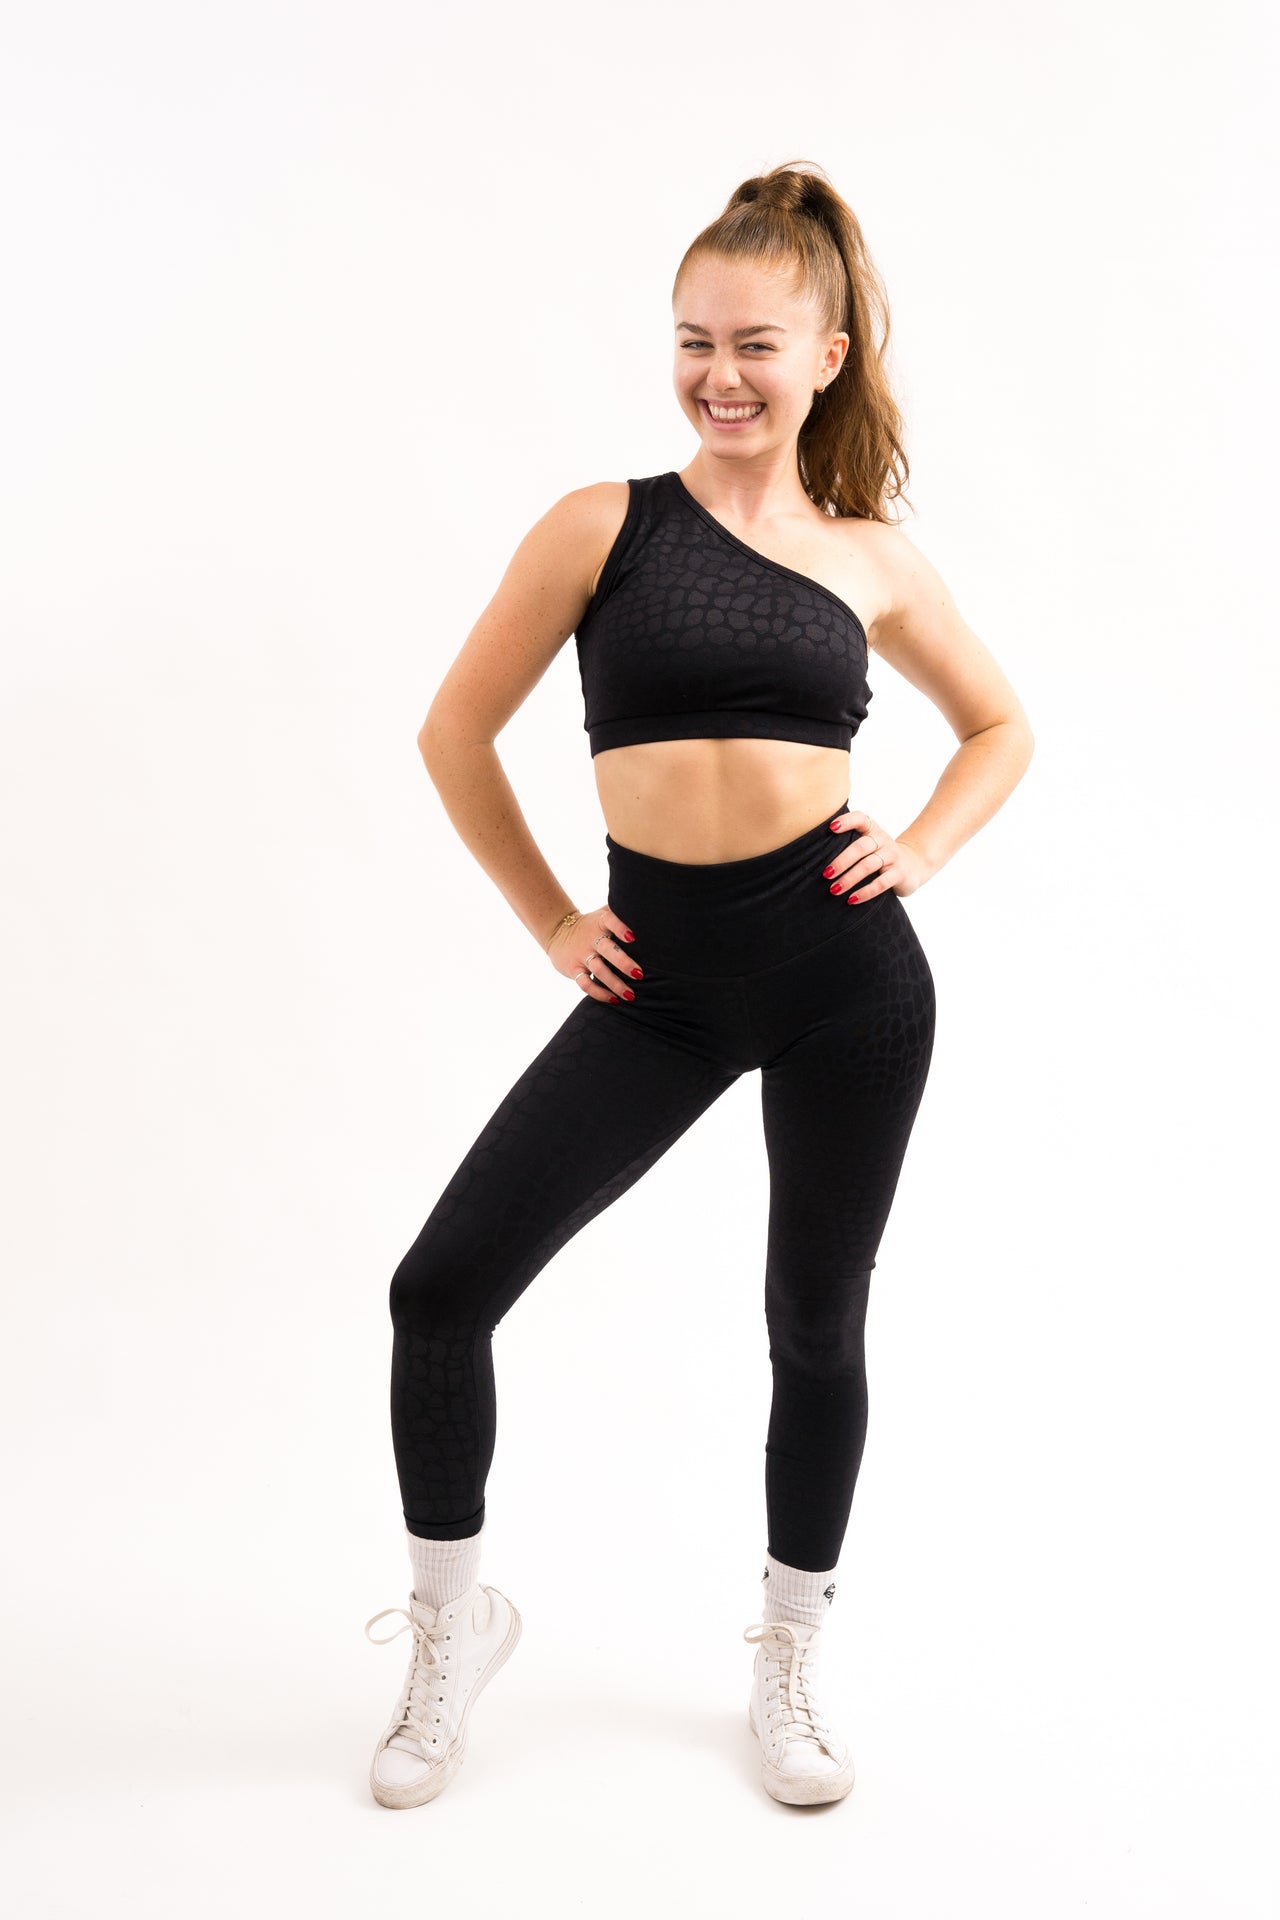 Women - Sports Bras - Finish The Outfit